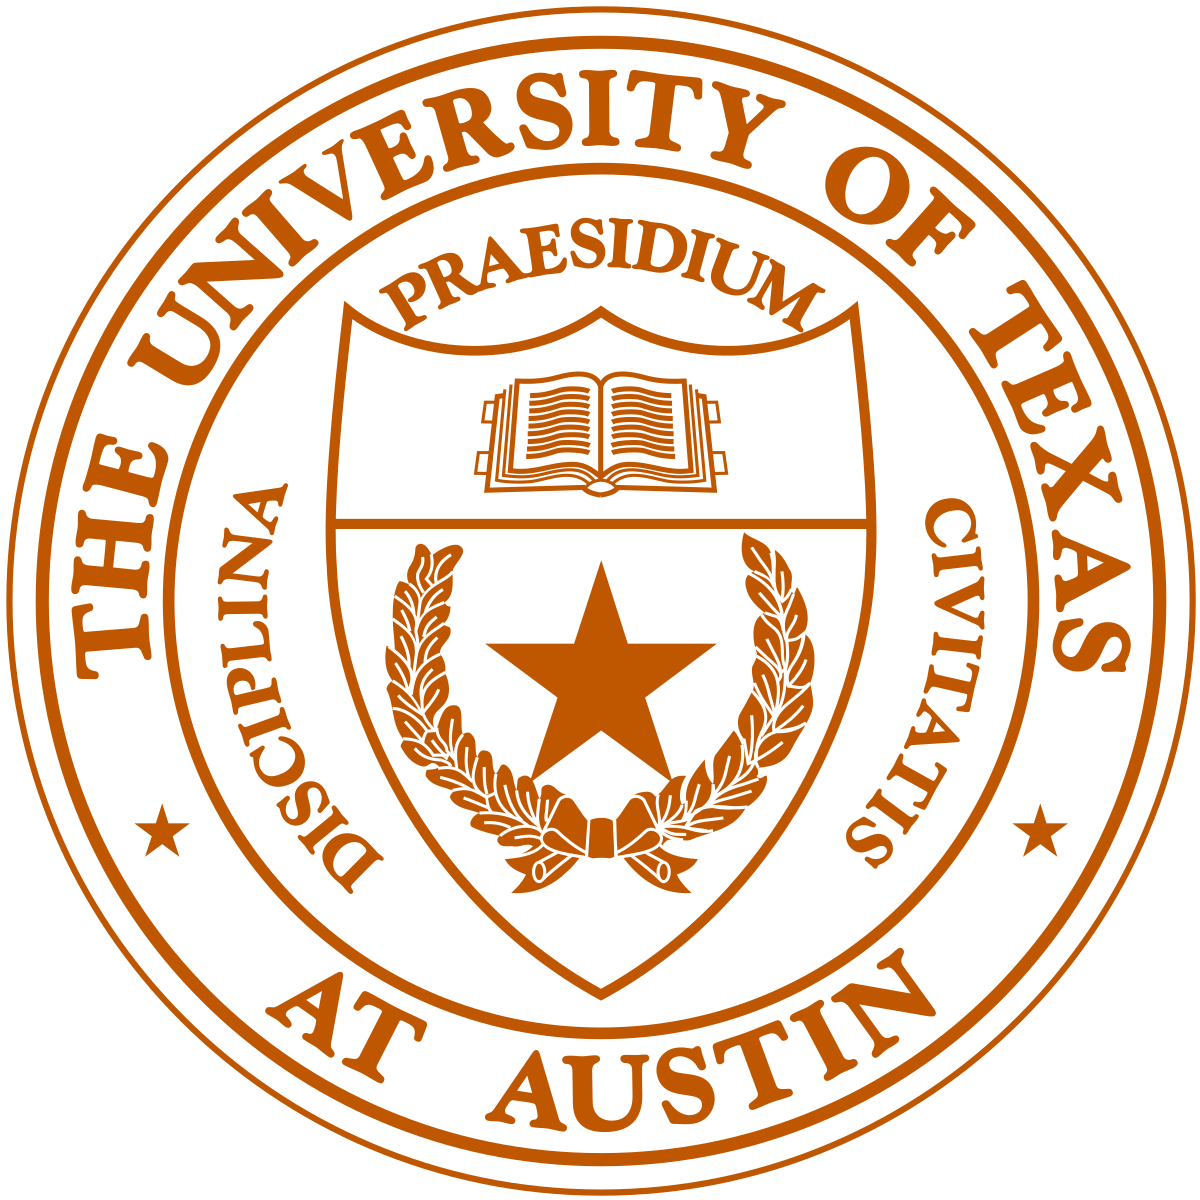 1200px-University_of_Texas_at_Austin_seal.svg.png